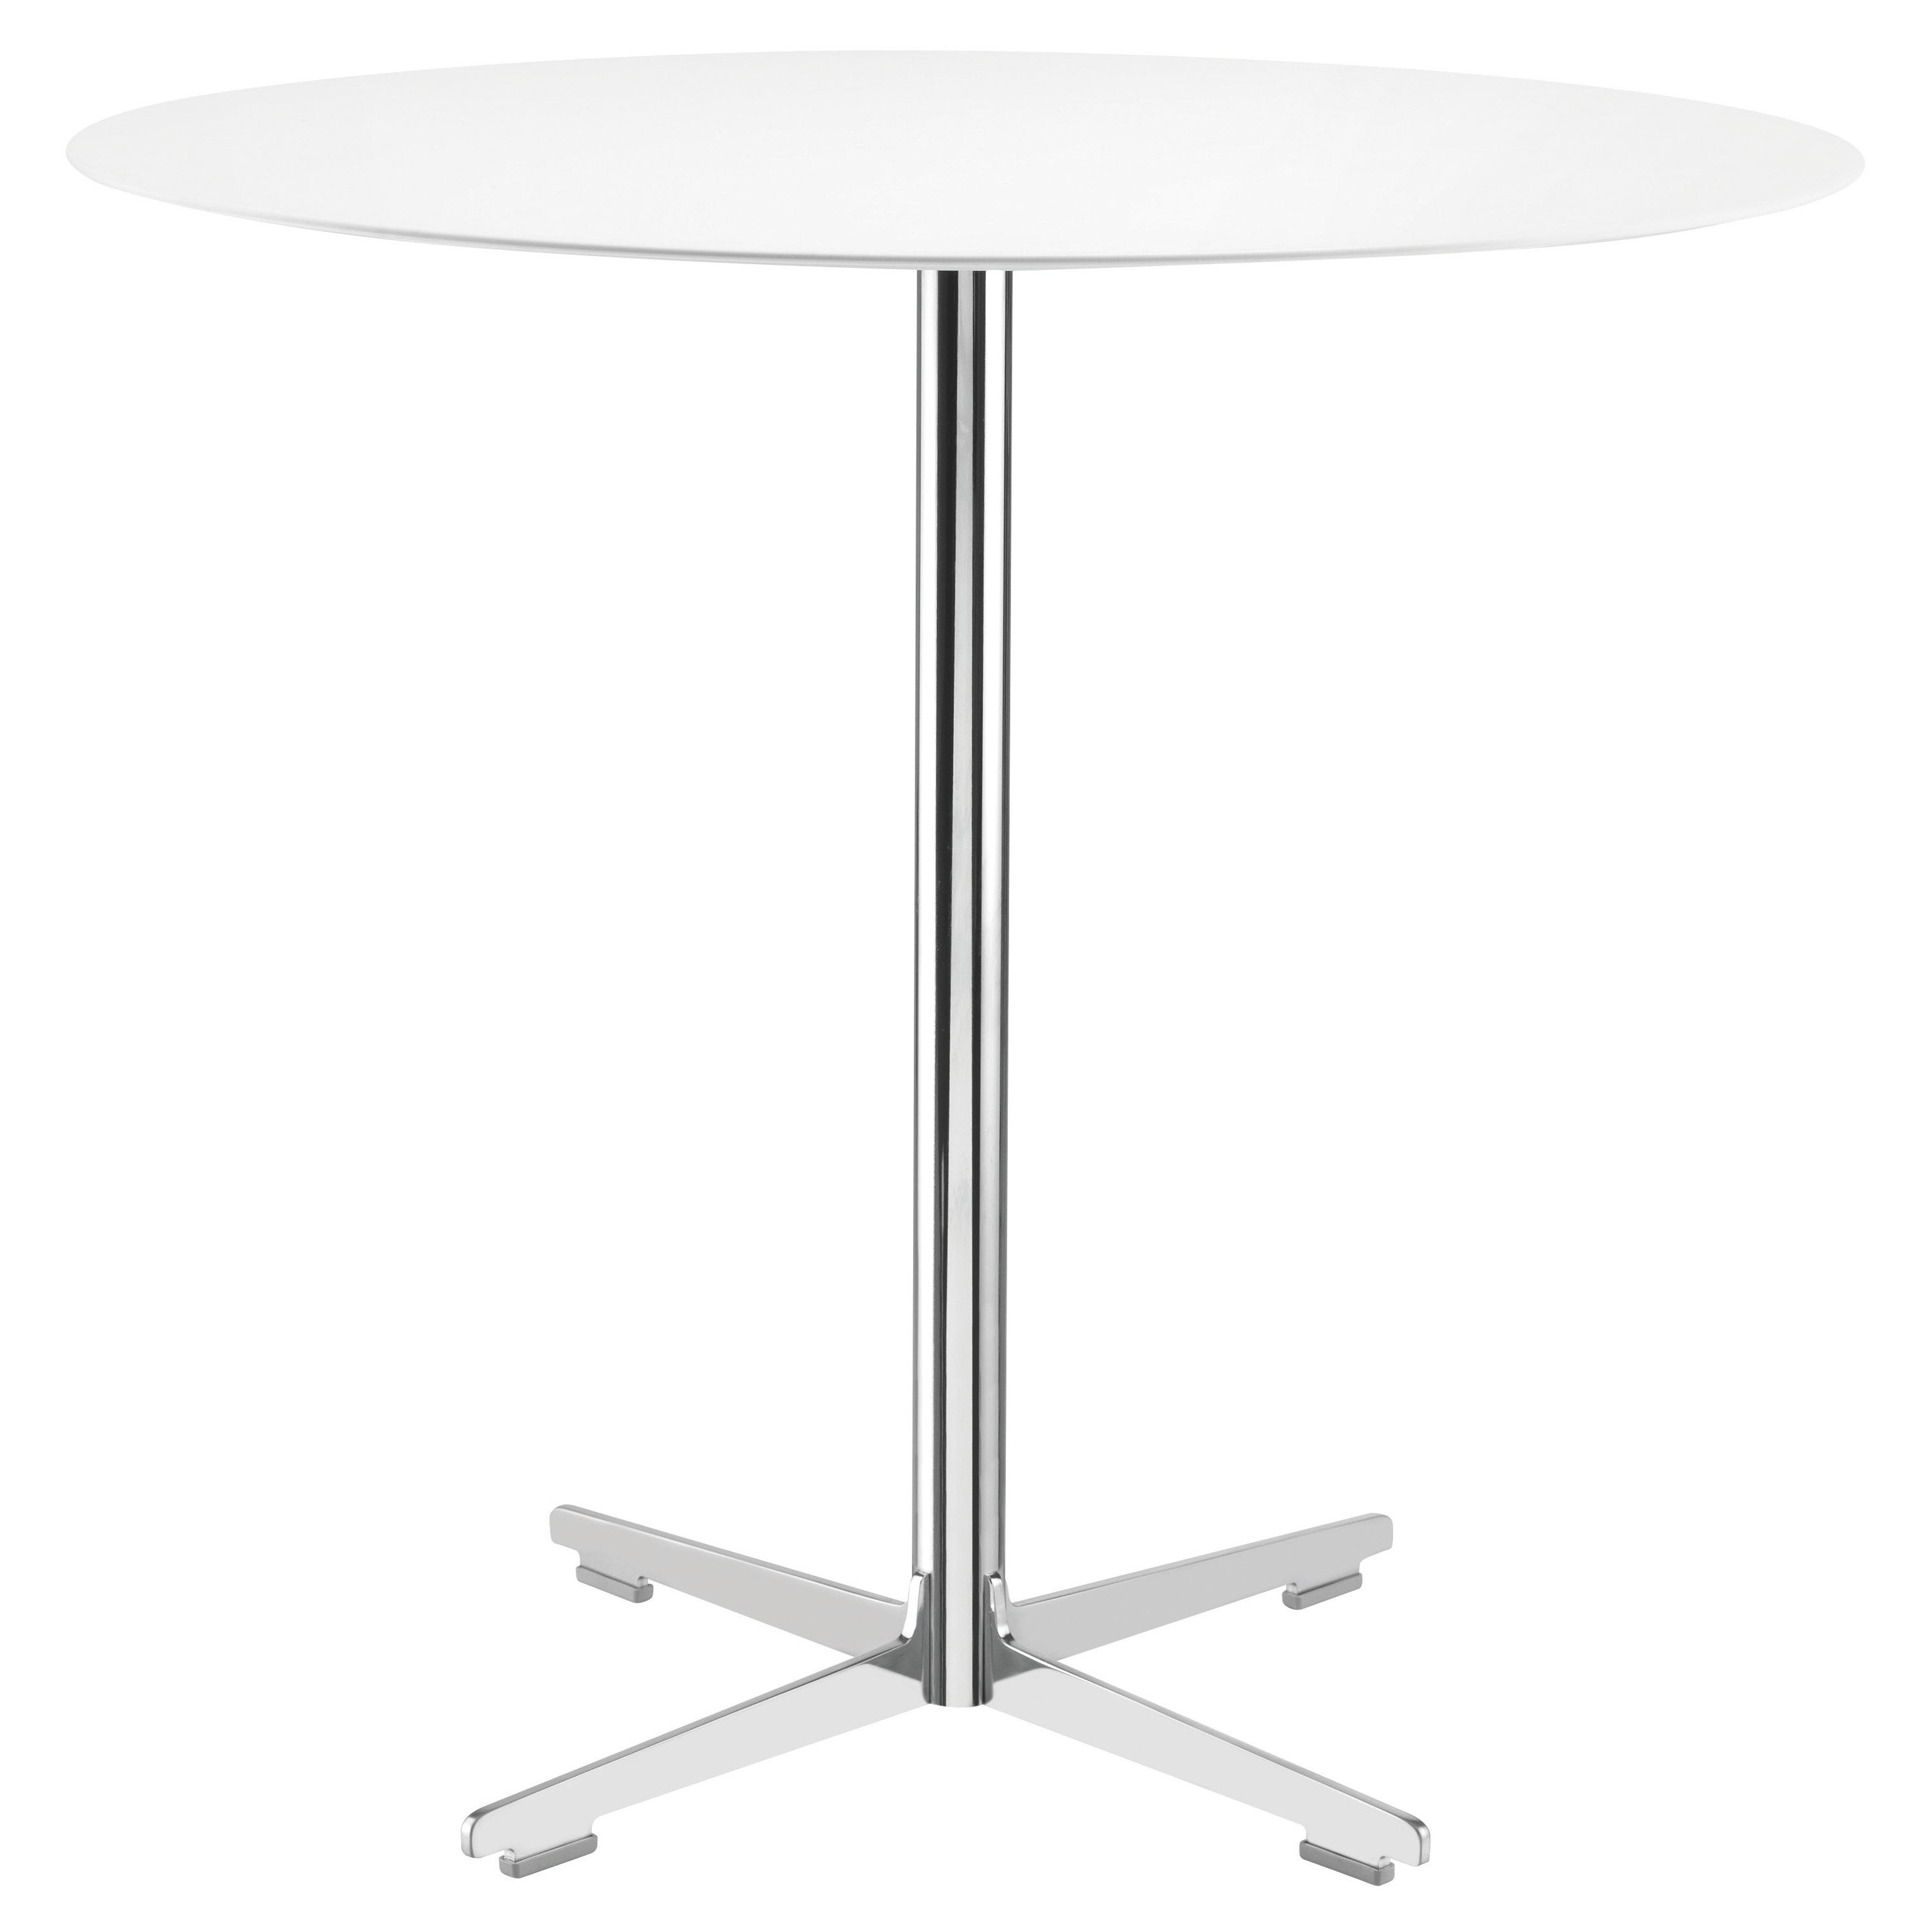 Alias Large 572 Cross Table with White Top and Lacquered Steel Base